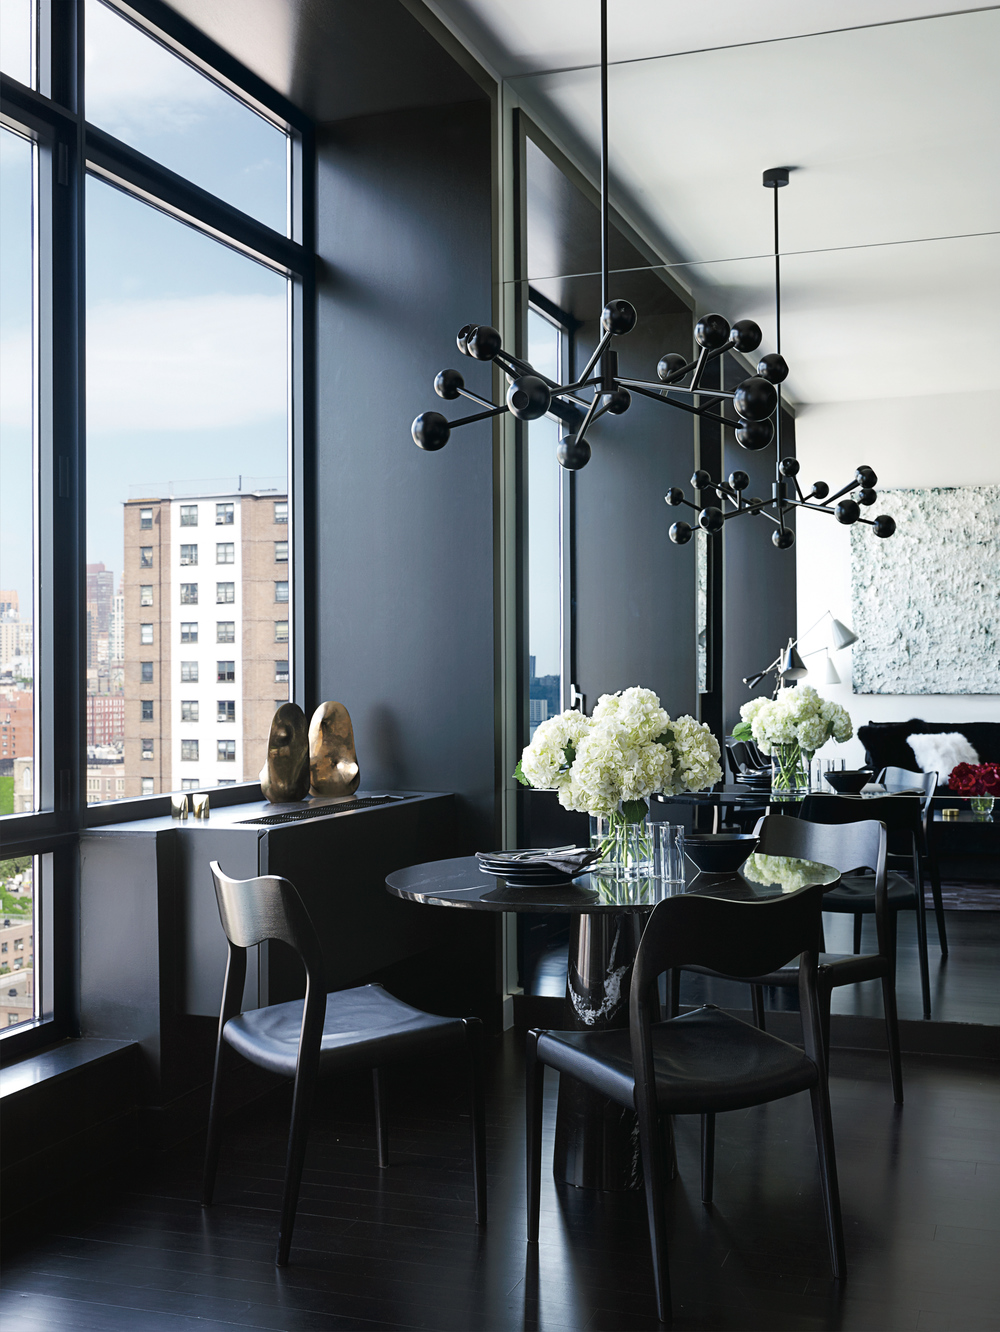 Contemporary Dining Room Sets to Inspire You